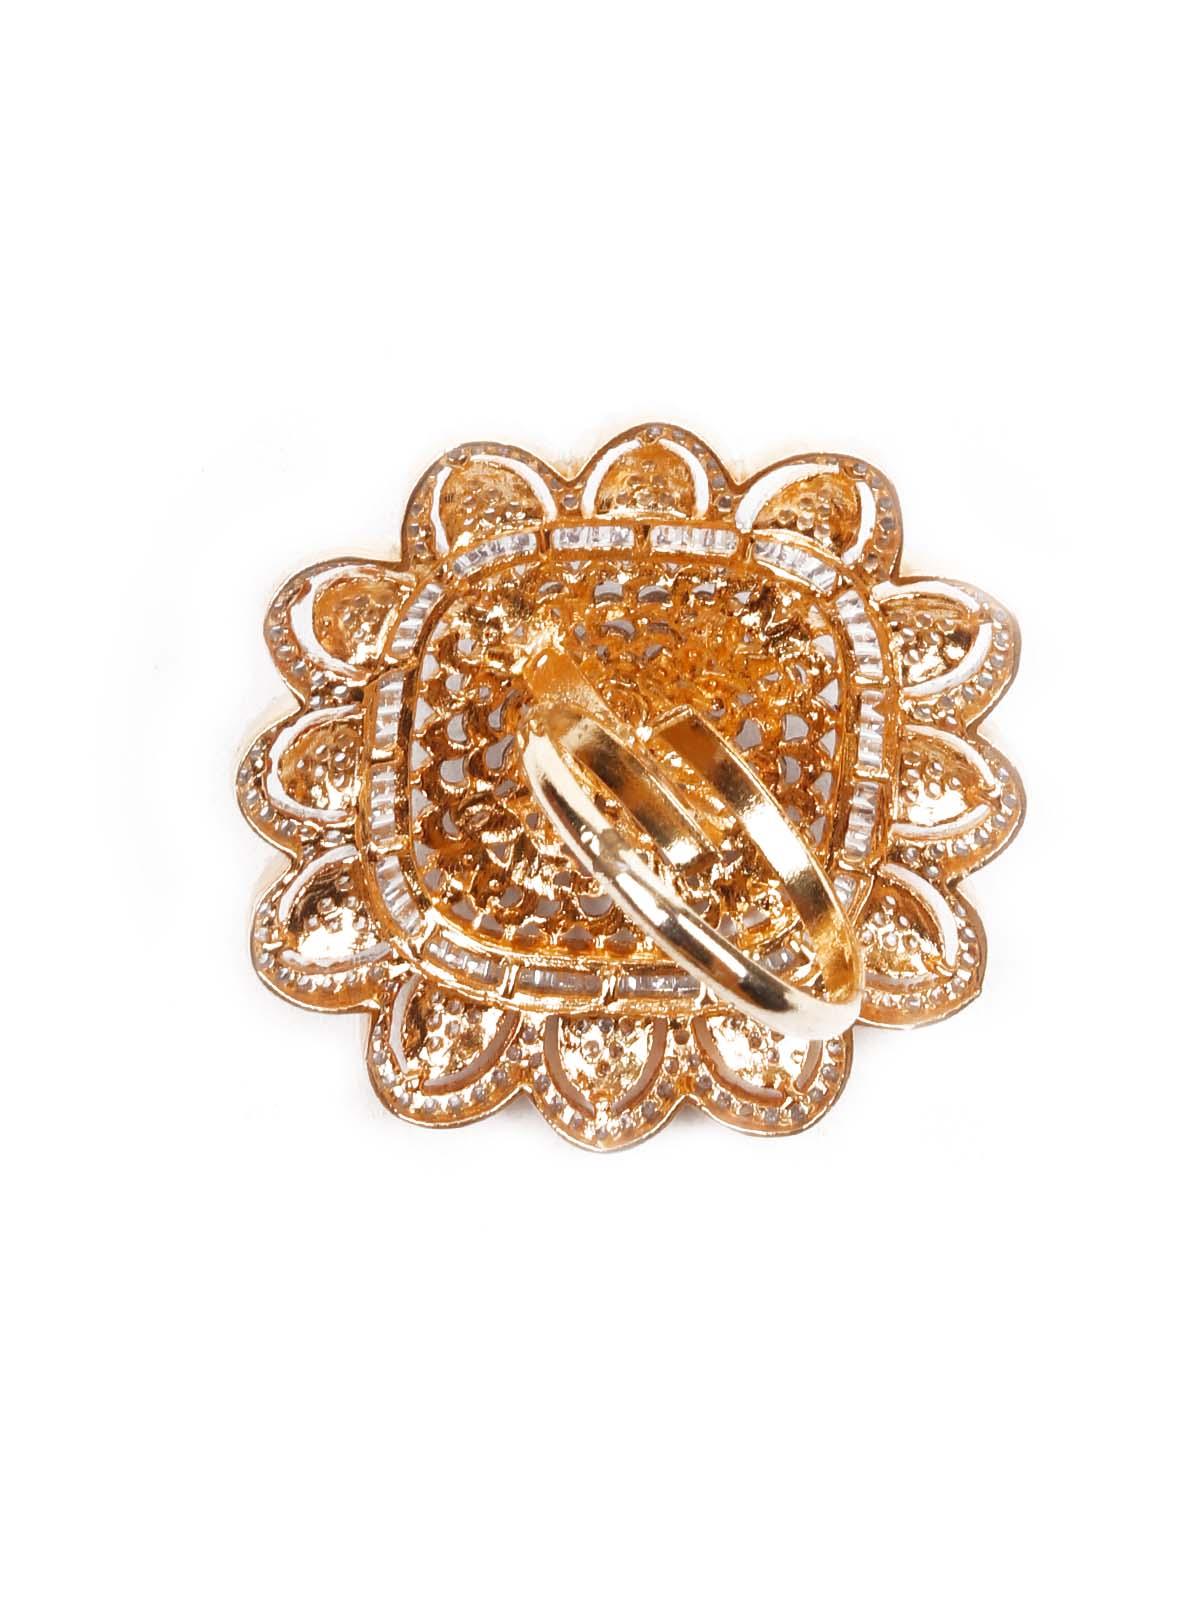 Women's Unique Austrian Diamond And Gold Studded Ring - Odette